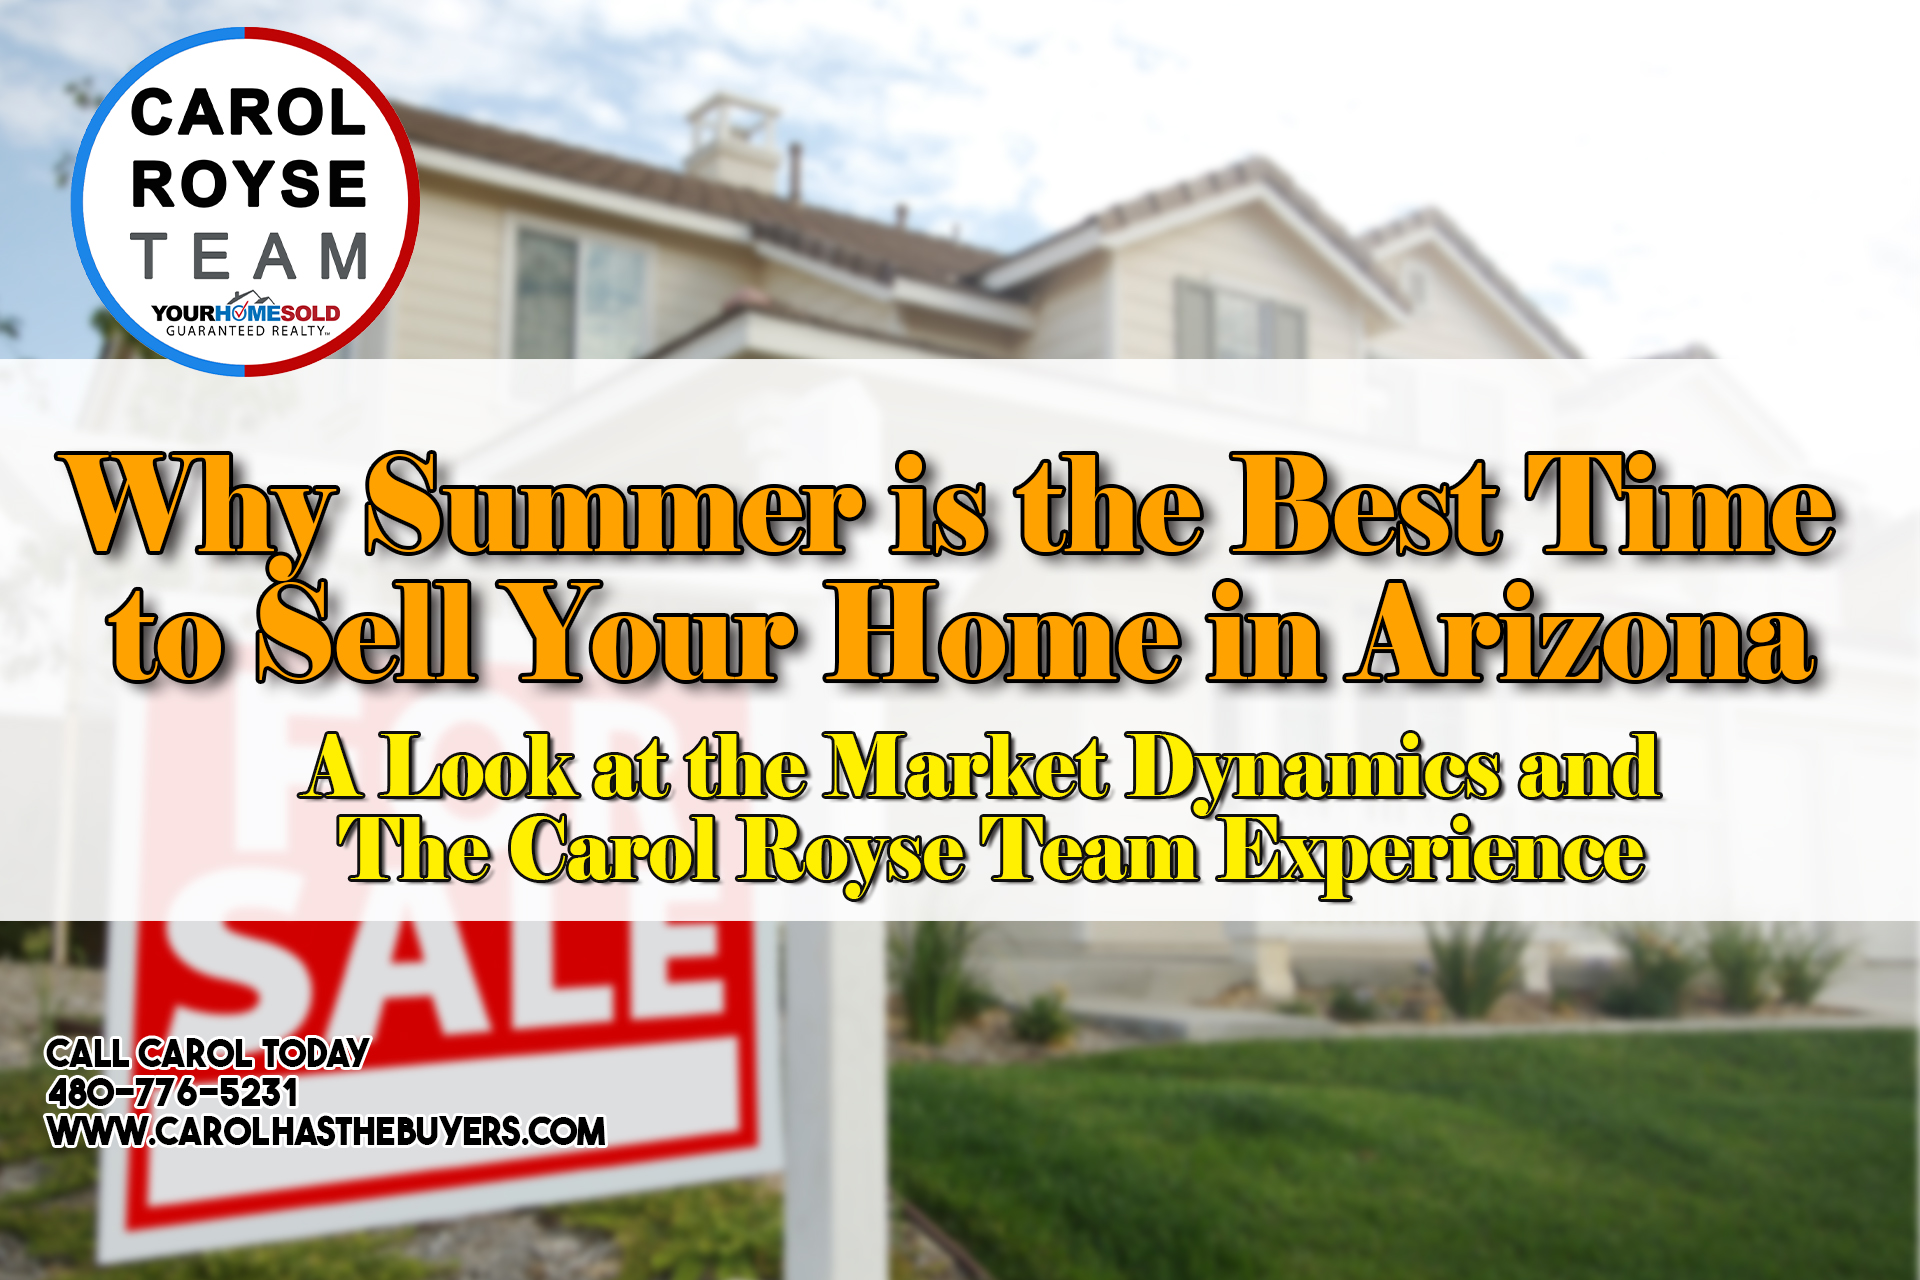 Why Summer is the Best Time to Sell Your Home in Arizona: A Look at the Market Dynamics and The Carol Royse Team Experience